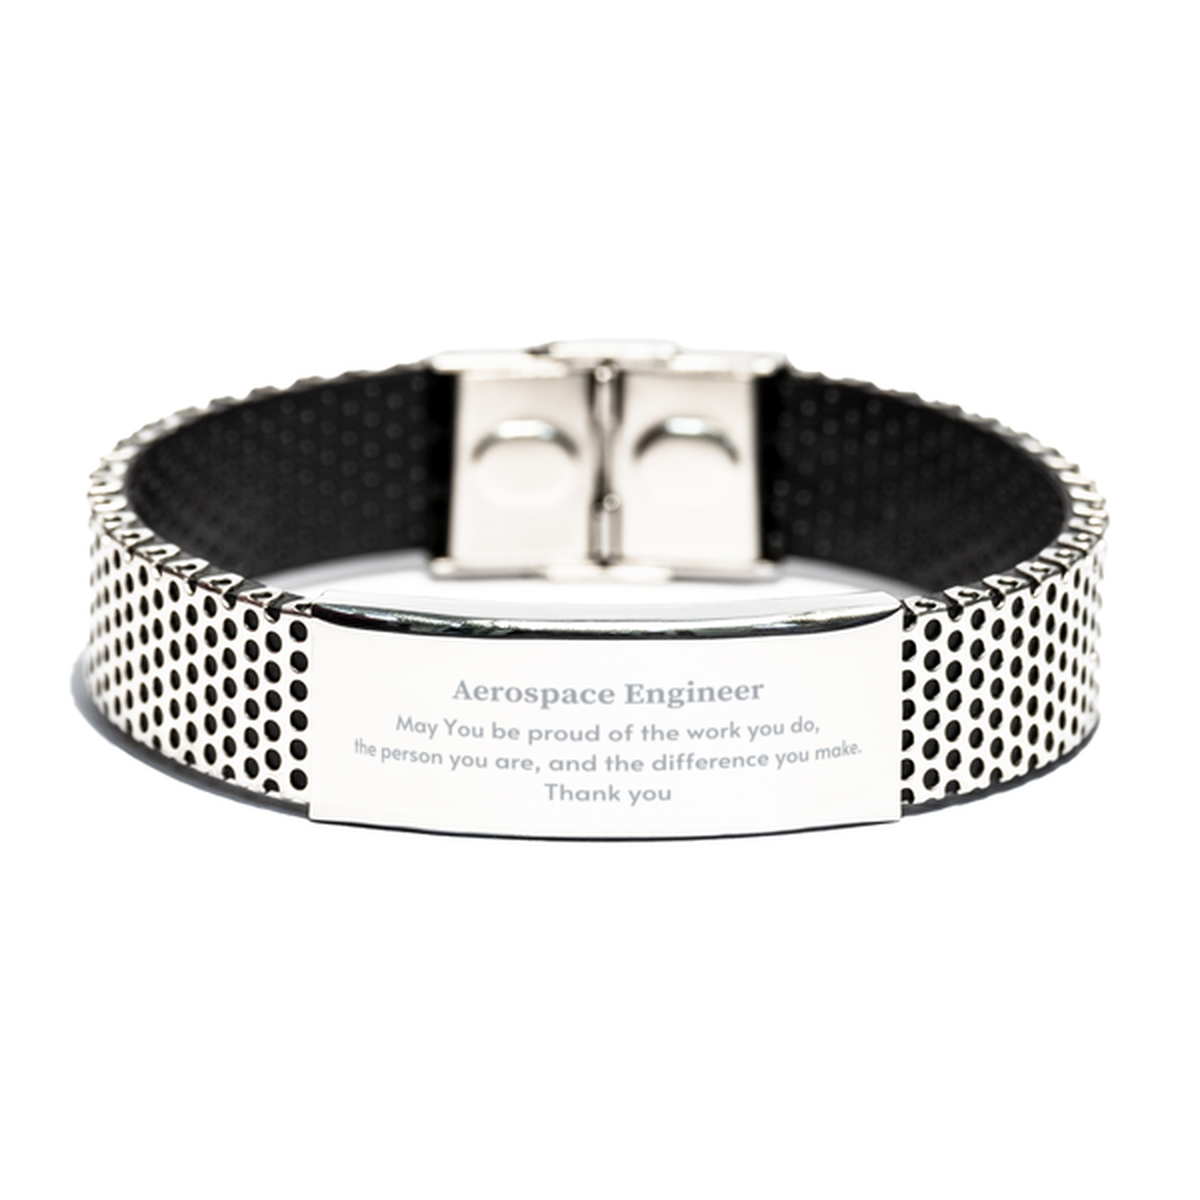 Heartwarming Stainless Steel Bracelet Retirement Coworkers Gifts for Aerospace Engineer, Aerospace Engineer May You be proud of the work you do, the person you are Gifts for Boss Men Women Friends